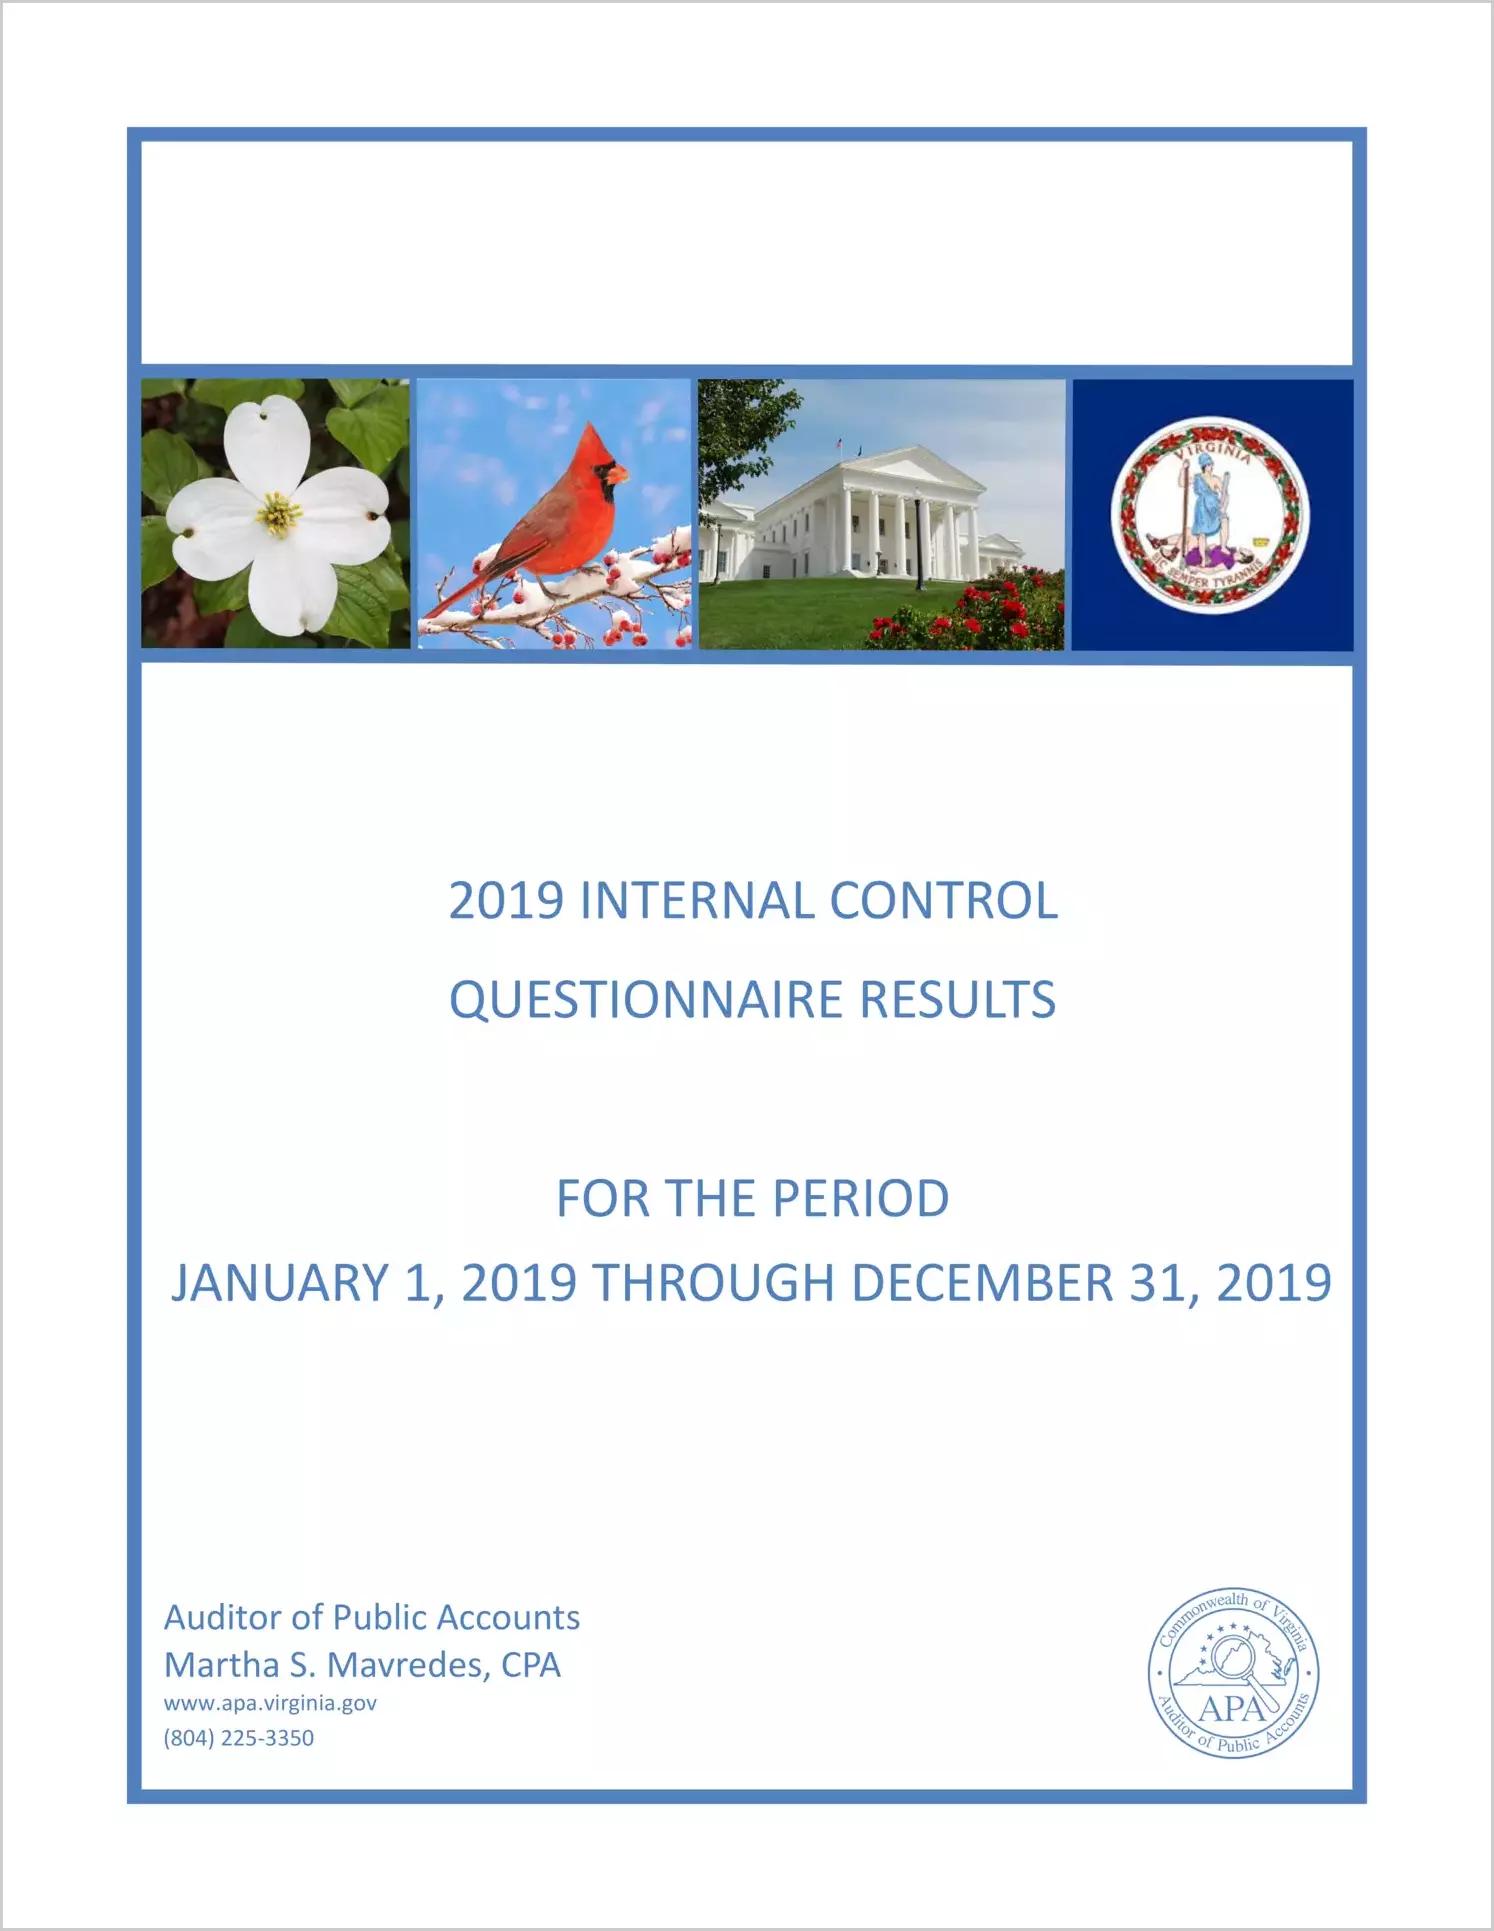 2019 Internal Control Questionnaire Results for the period January 1, 2019 through December 31, 2019